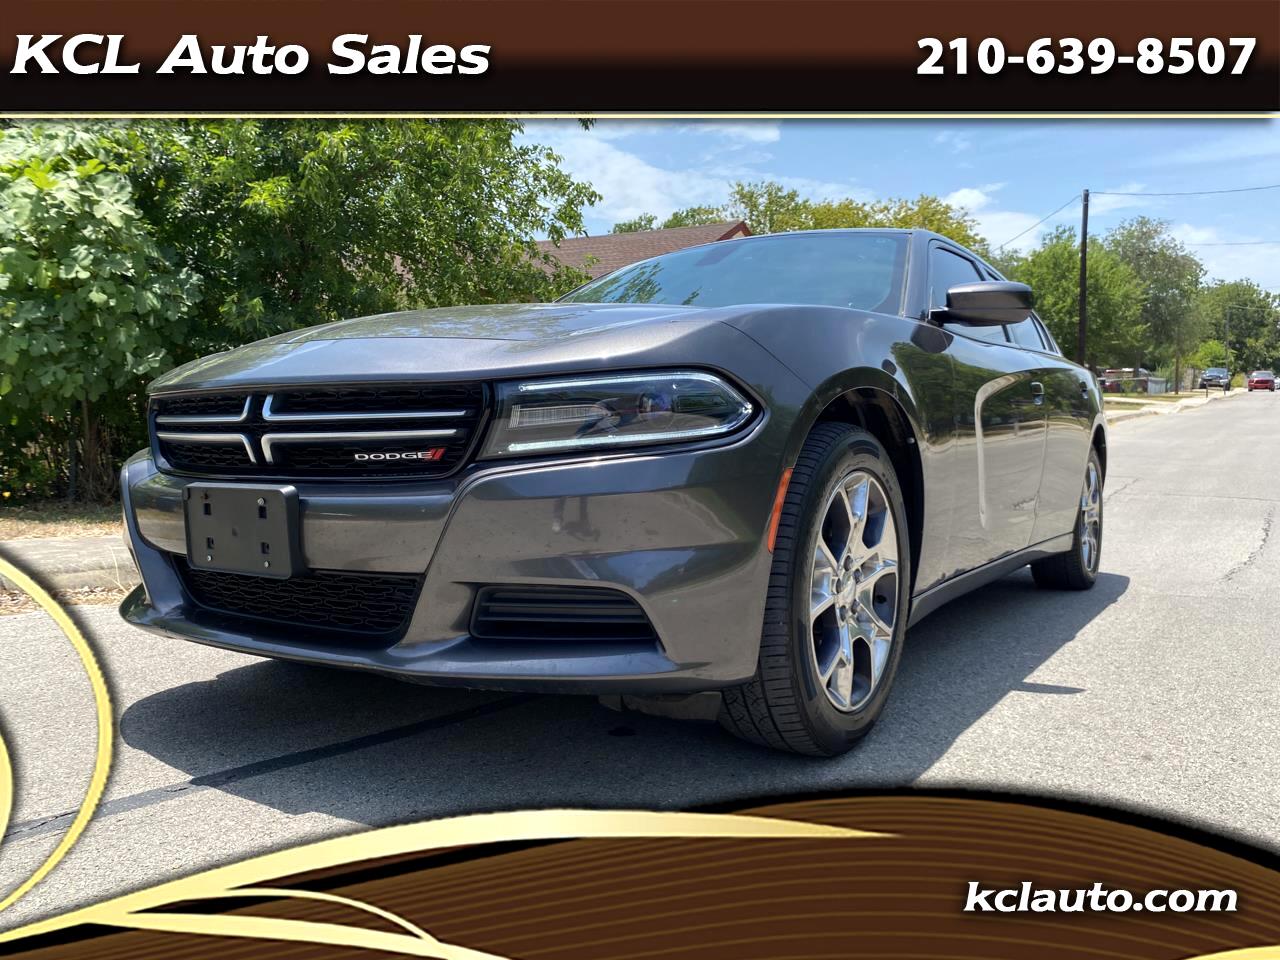 Dodge Charger 4dr Sdn SE AWD 2015